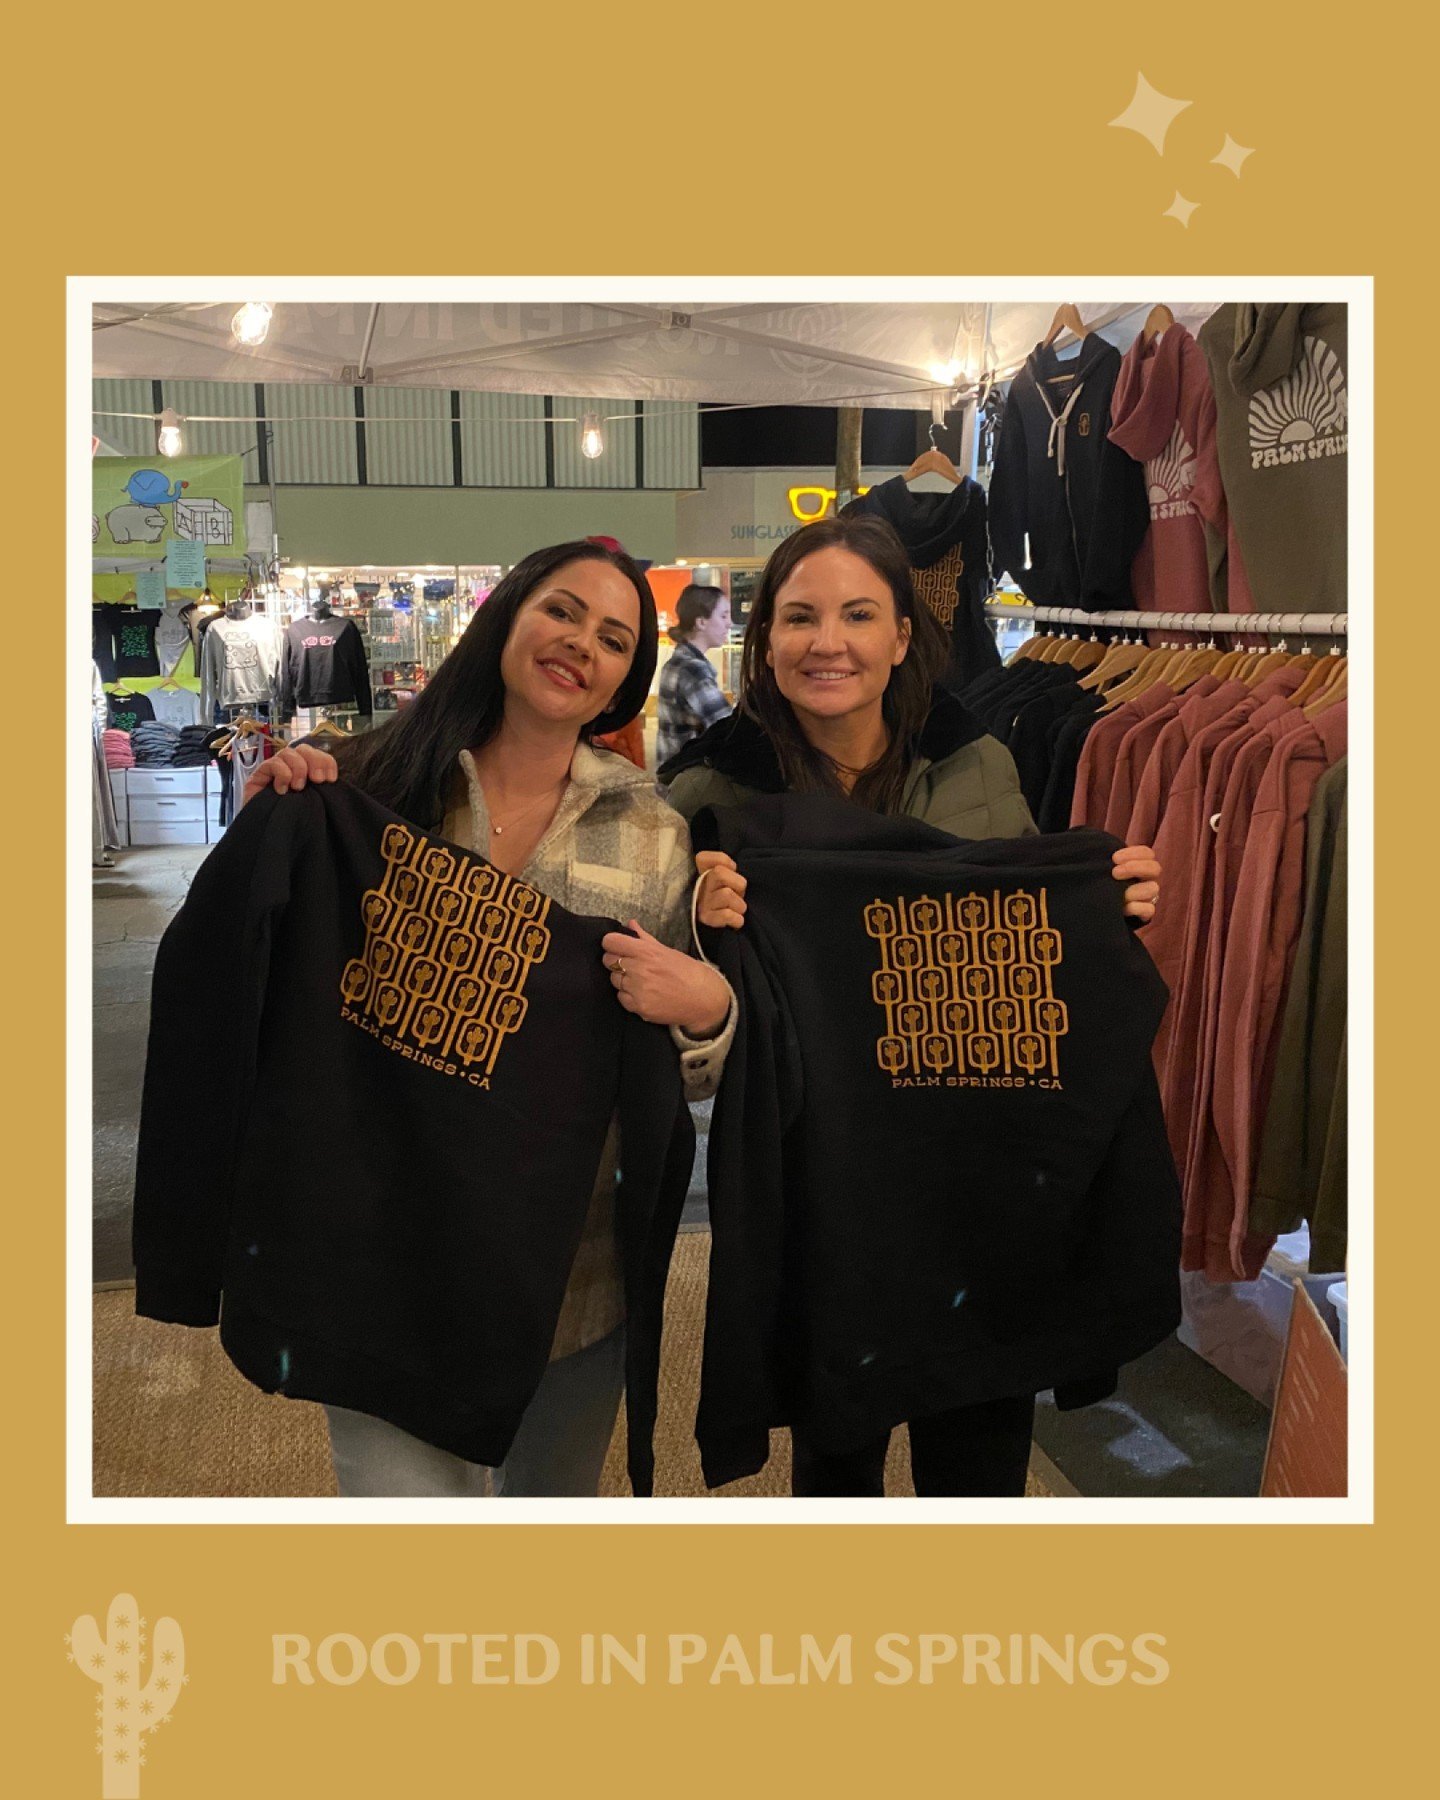 Our Mod Cactus Hoodies look twice as cute on these lovely ladies!! 💛💛🌵🌵
*
*
*
*
*
#rootedinpalmsprings #palmsprings #palmspringsy #psvillagefest #palmspringsvillagefest #villagefestpalmsprings #downtownpalmsprings #palmspringsca #palmspringscalif